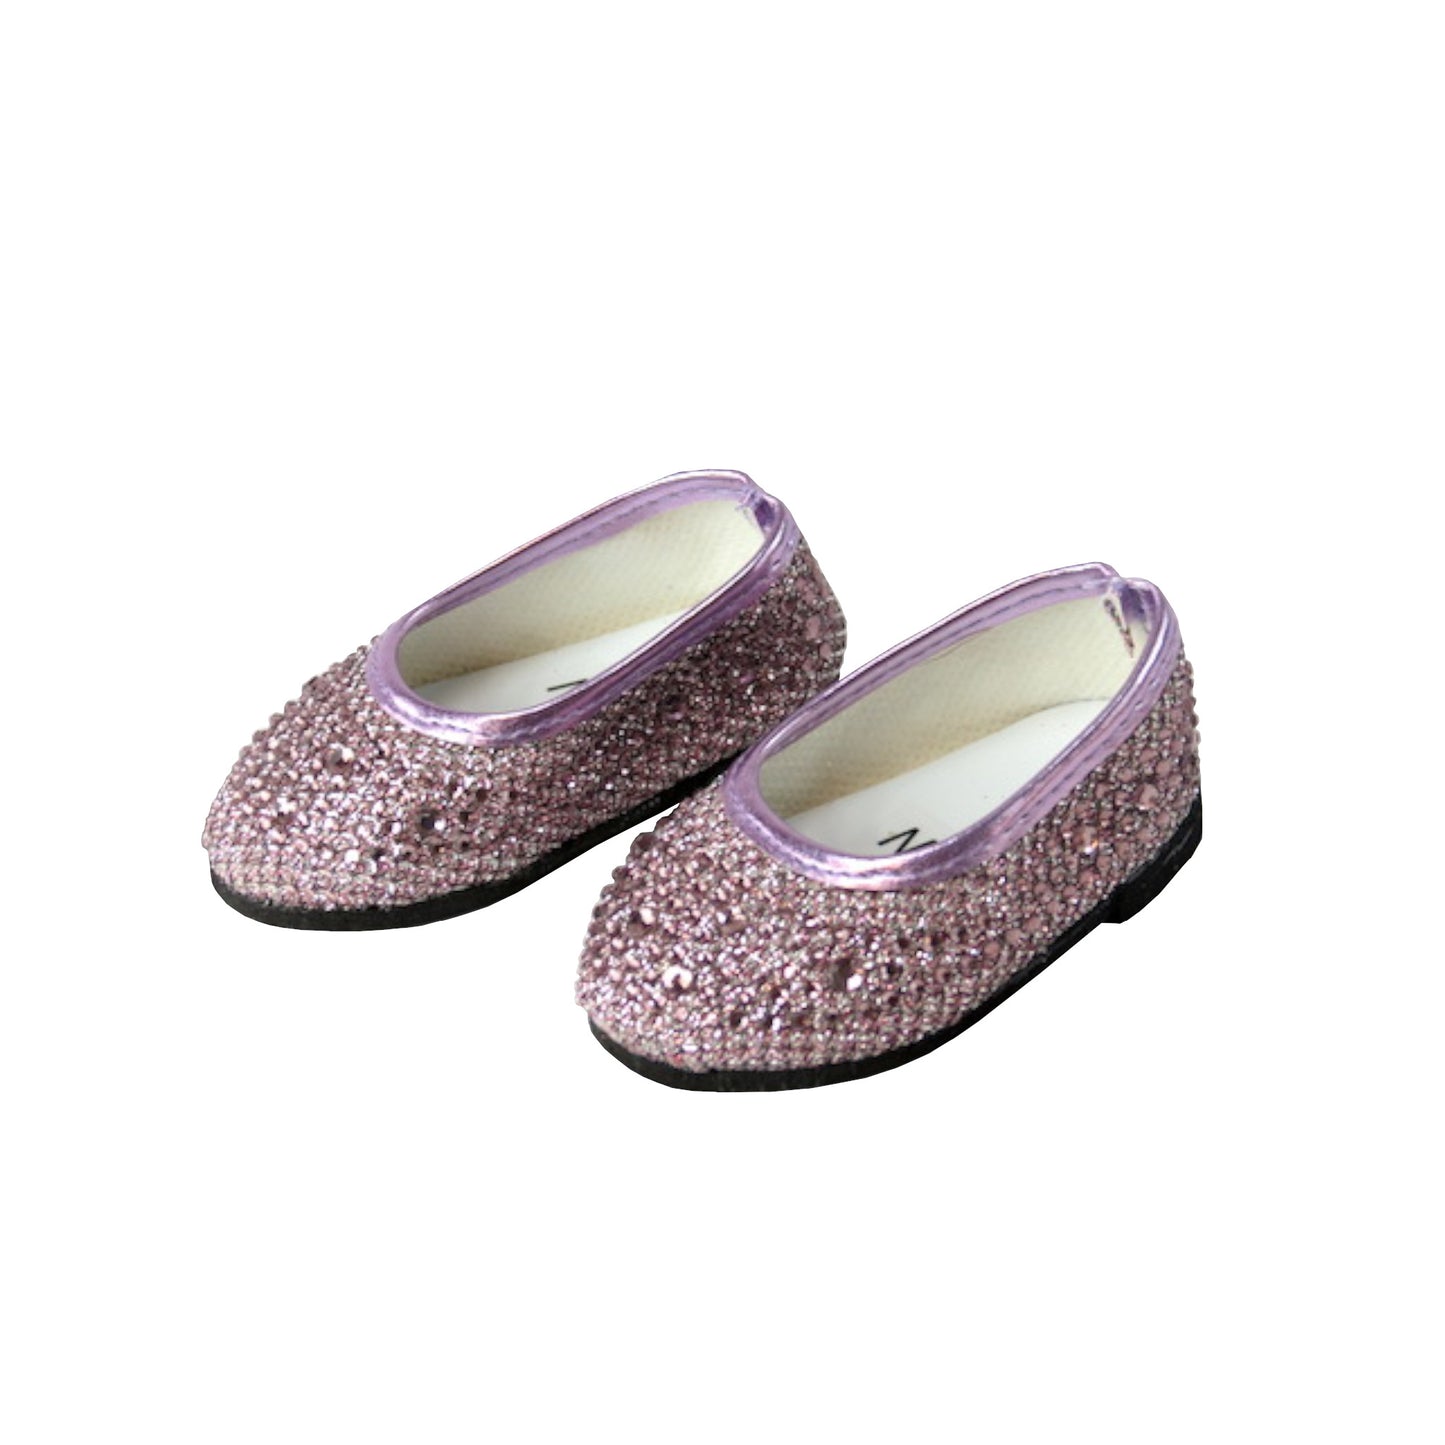 Jeweled Glitter Lavender Flats for 18-inch dolls 